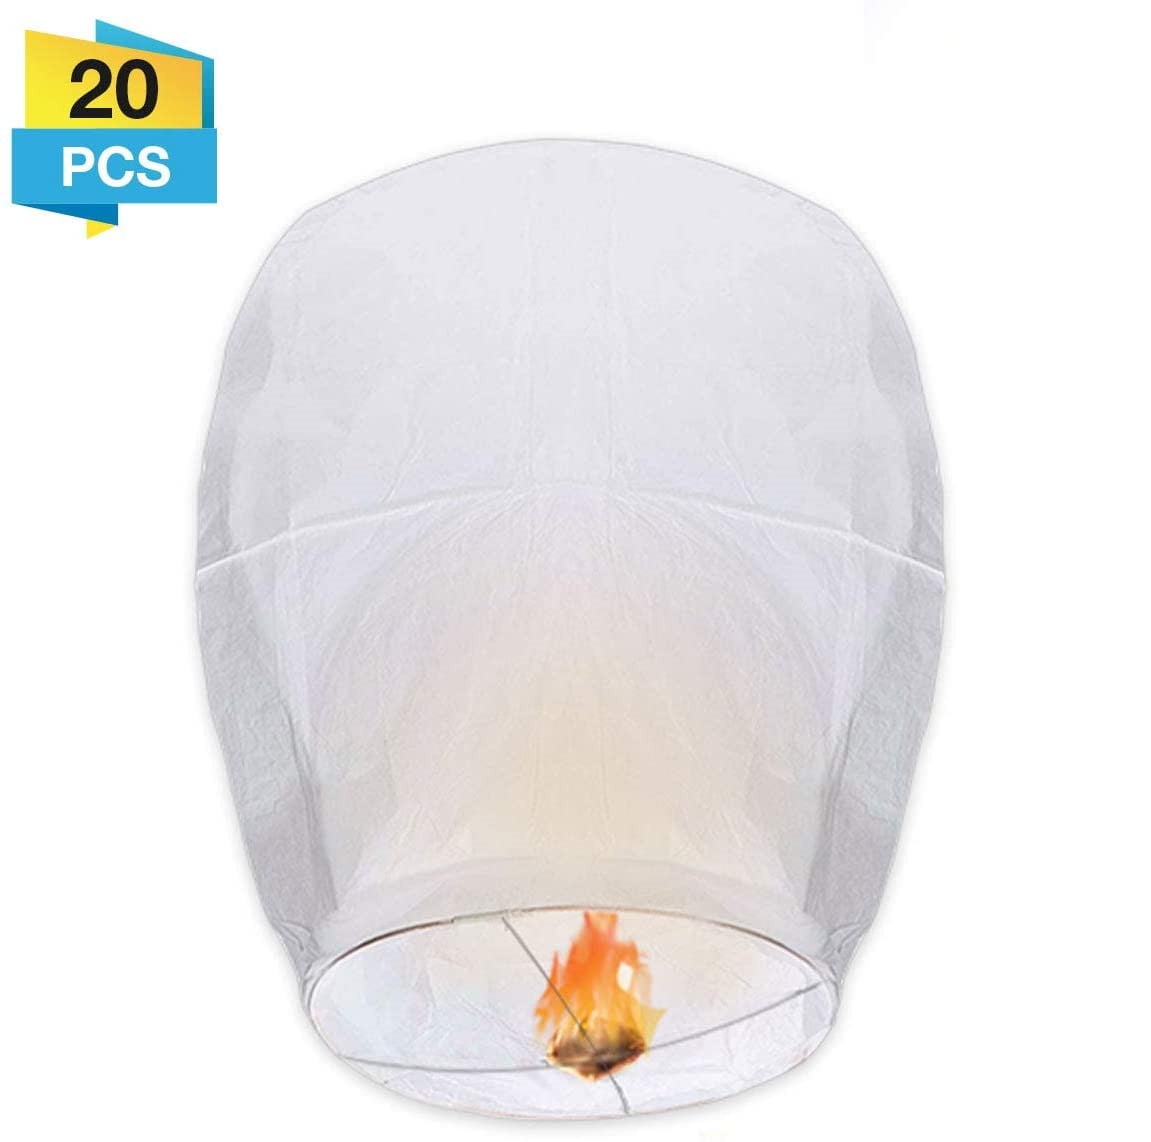 10 Pack Chinese Lanterns Sky Lanterns Release New Year Celebration and More Environmentally Friendly Wishing Lanterns for Wedding Birthday Party